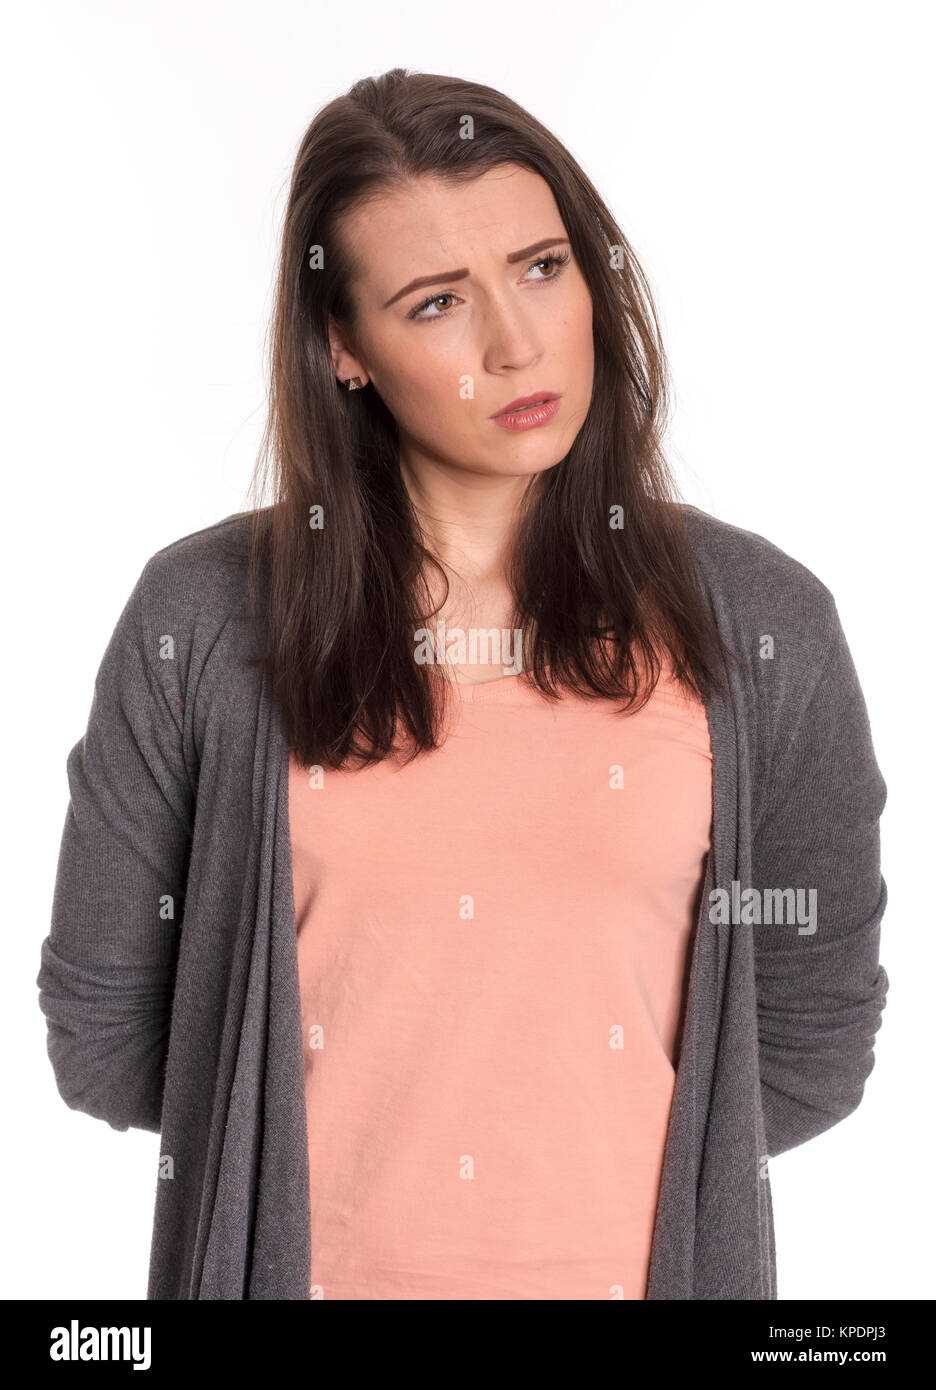 young woman in portrait looks contemplative Stock Photo